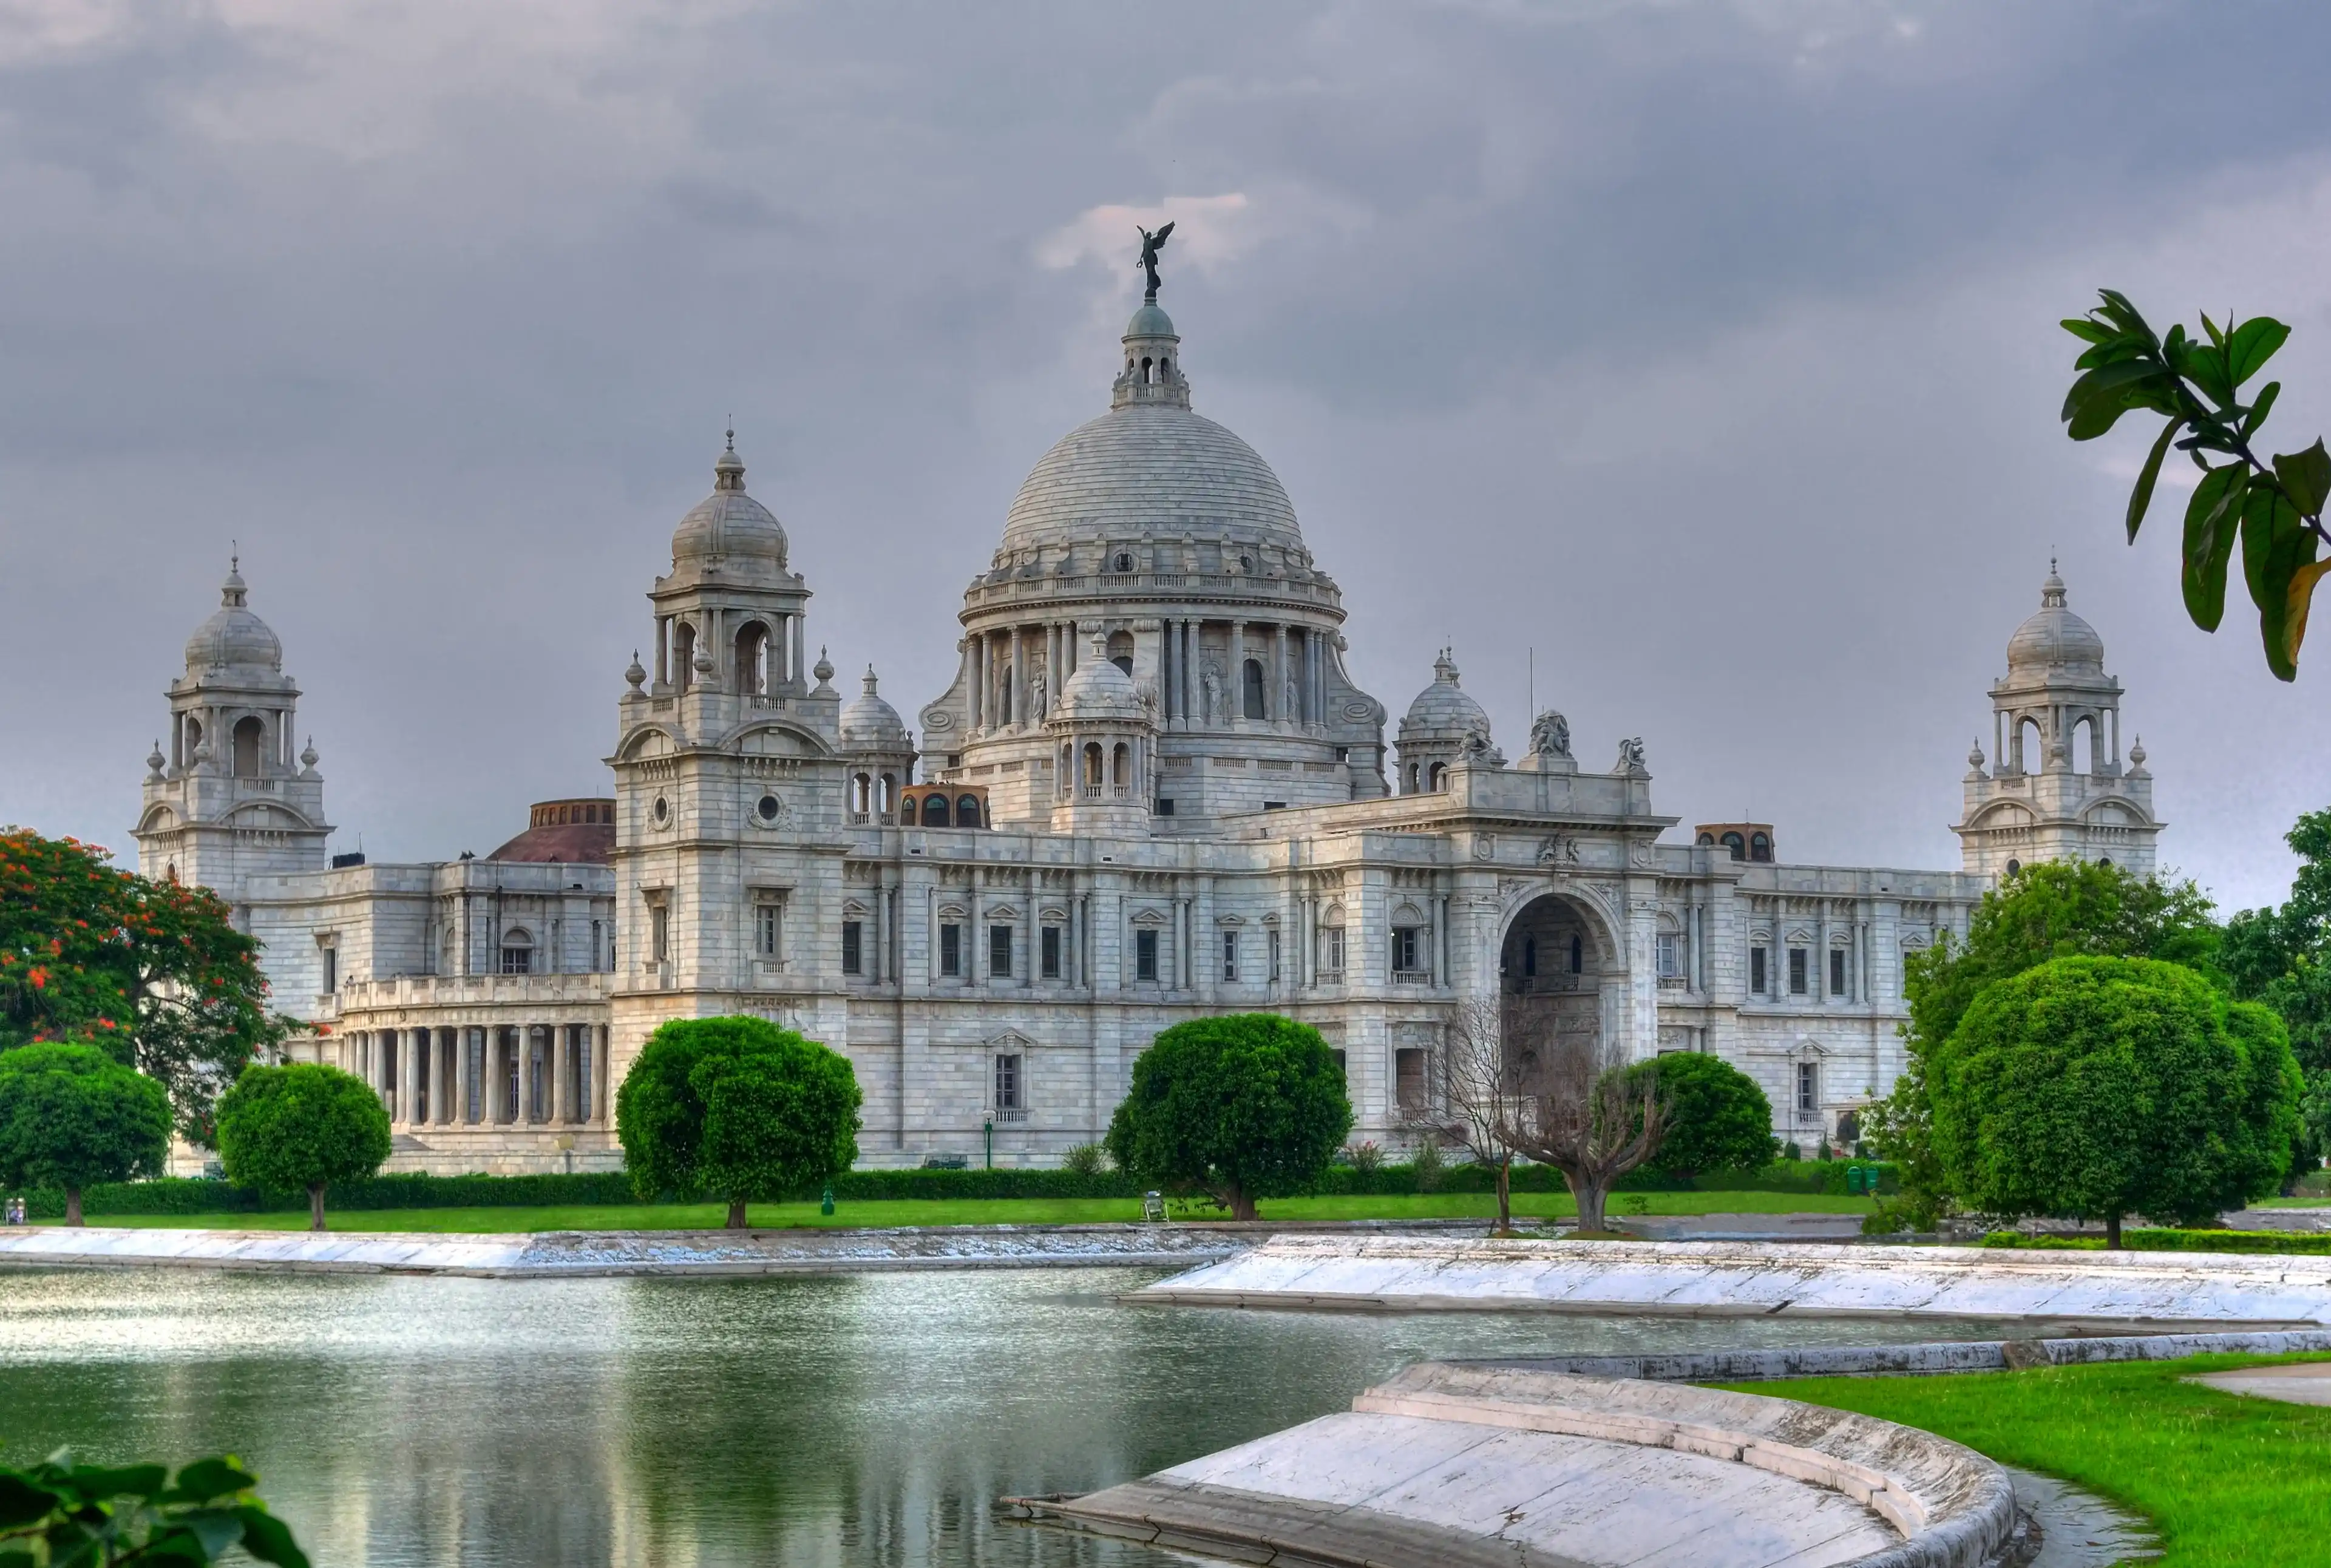 Landmark building of Calcutta (aka Kolkata), Victoria Memorial Hall with Queen's Garden in the foreground, pond, white Marble, cloudy sky